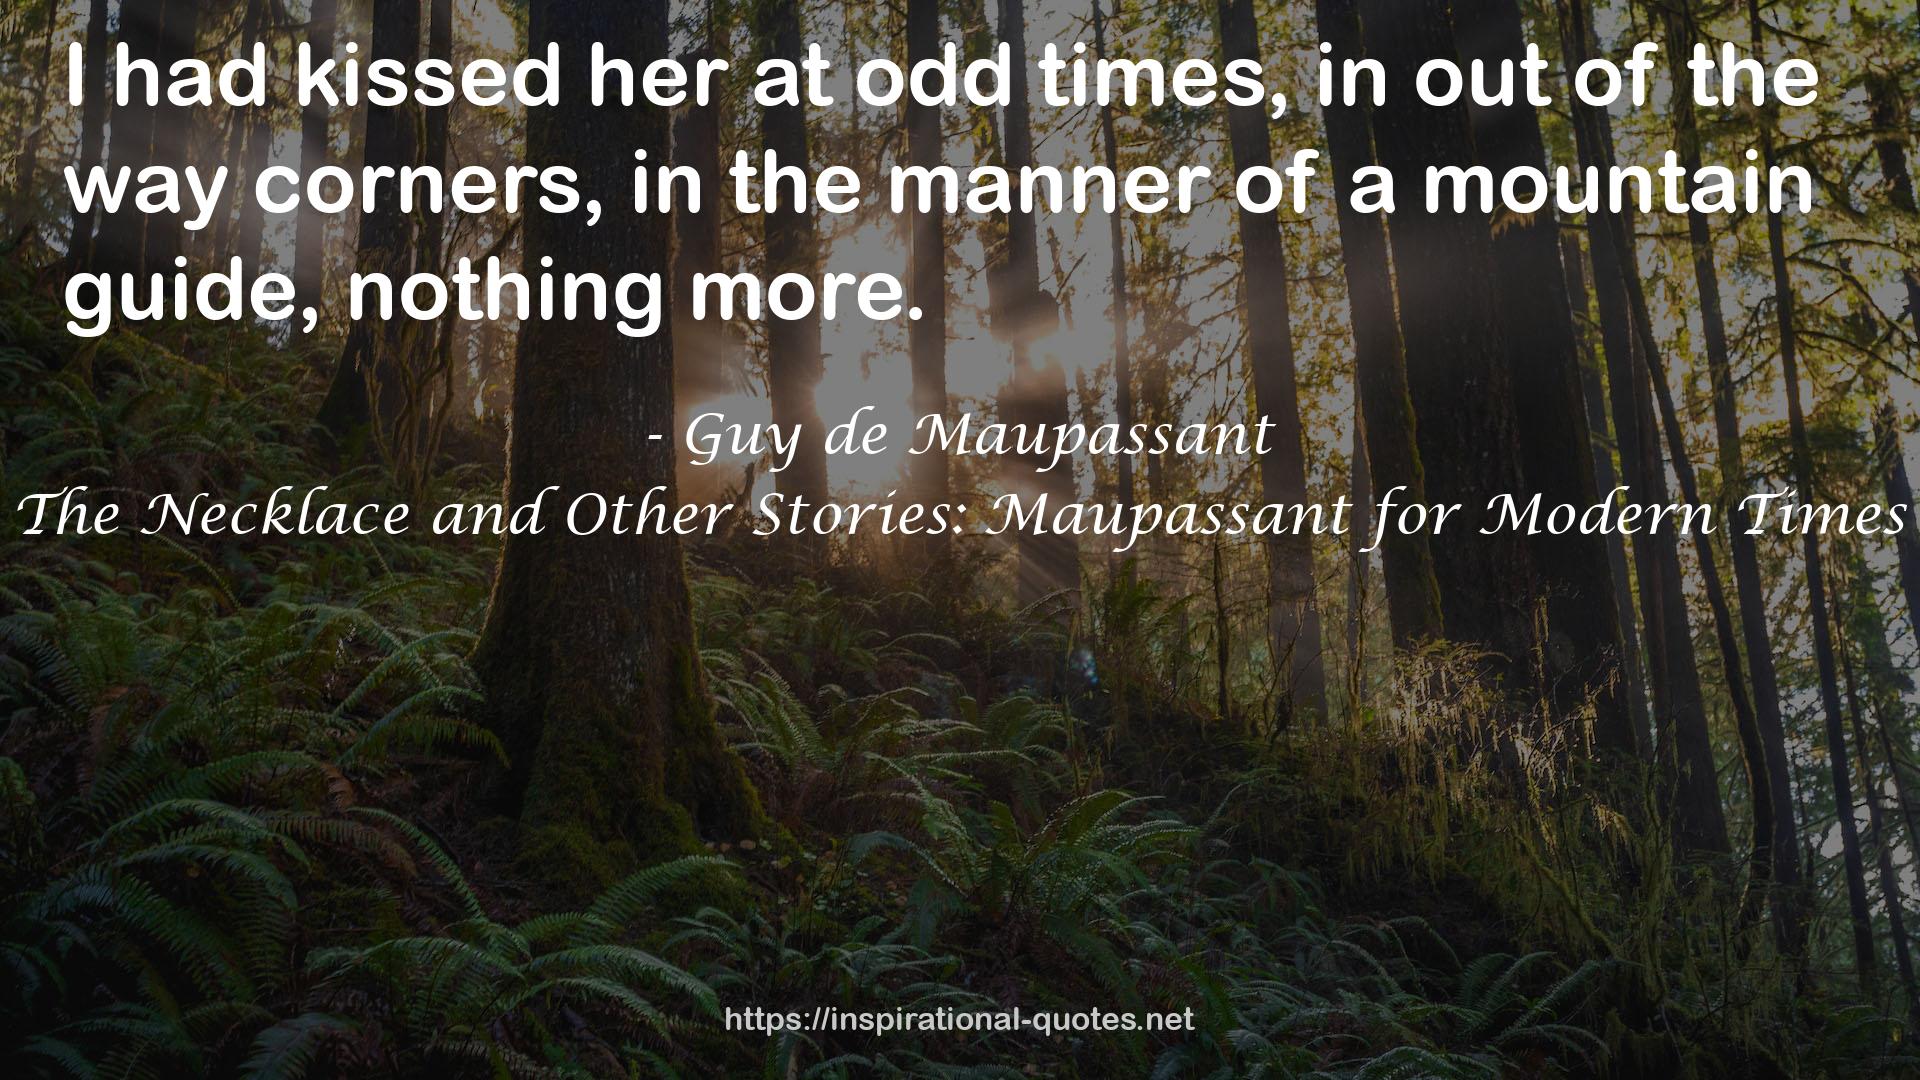 The Necklace and Other Stories: Maupassant for Modern Times QUOTES